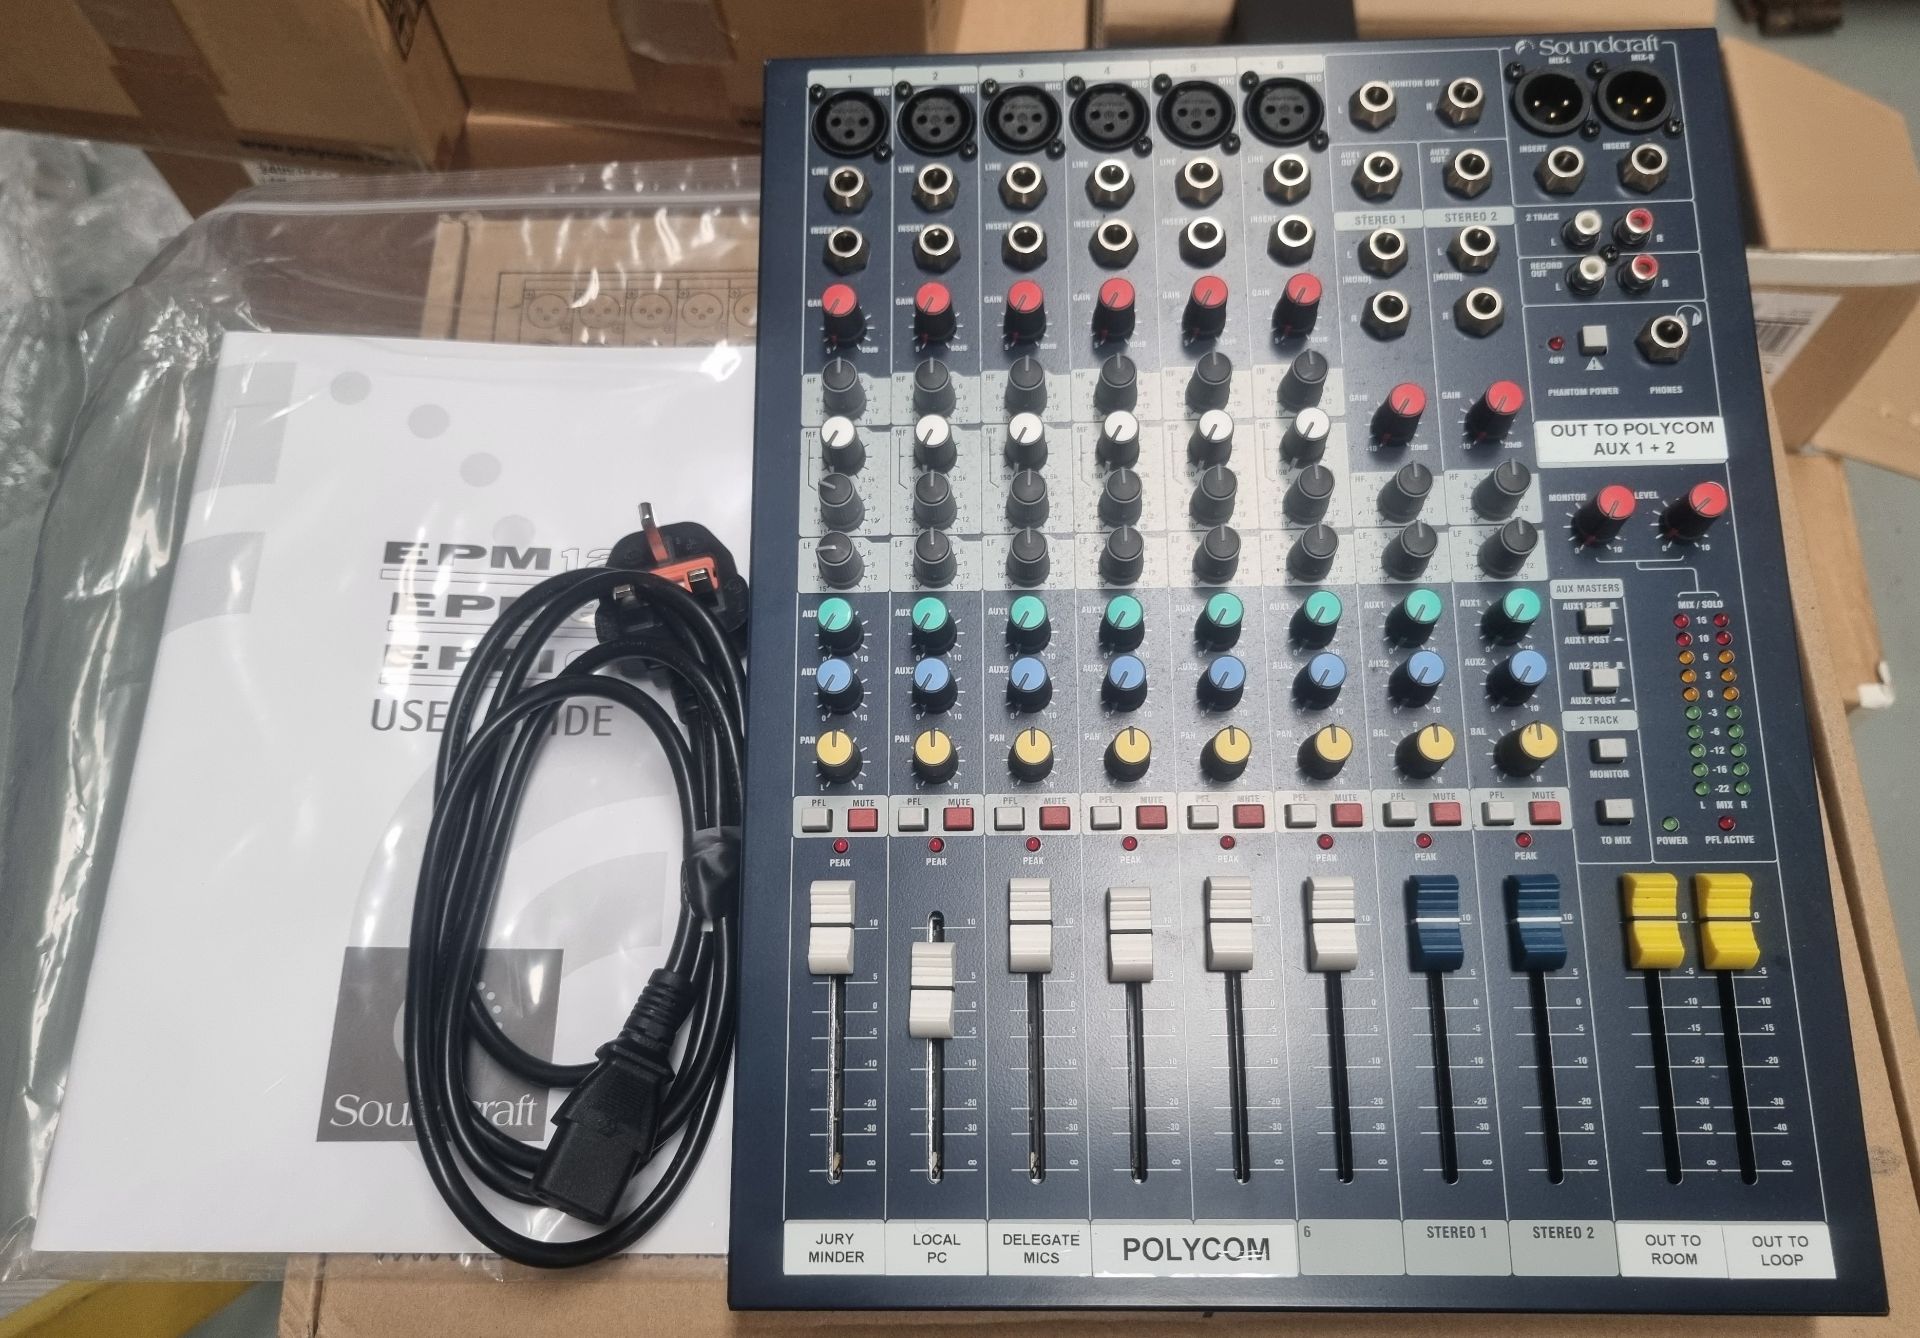 Soundcraft EMP-6 analogue mixer, STOCK IMAGE, tested and working comes with manual